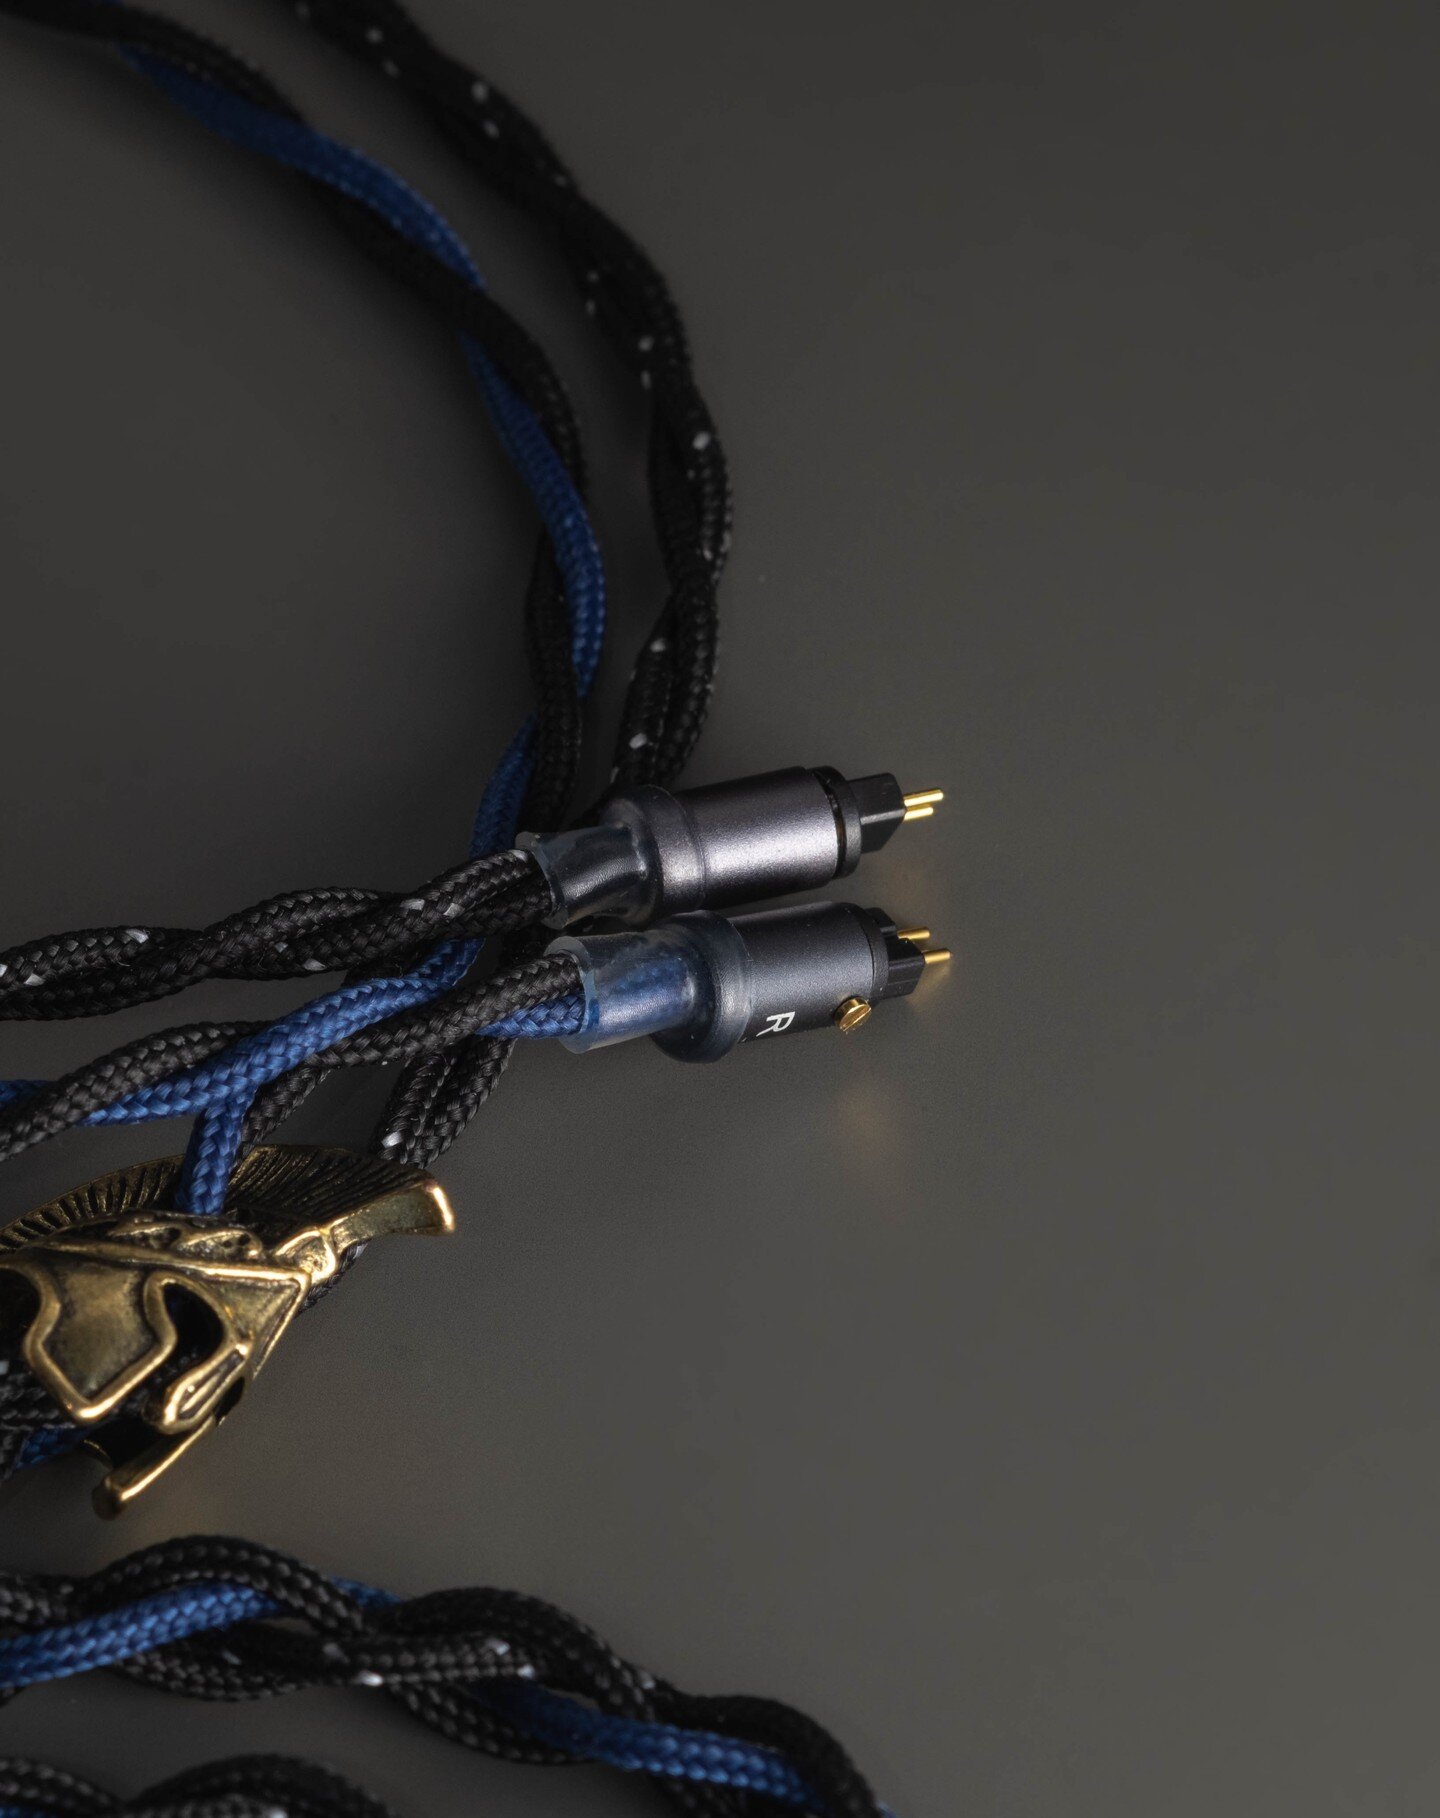 First shop in Europe to officially support OE Audio connectors - With this completely custom 7n up-occ copper iem cable with OE Audio multiconnects and @furutech 4.4mm sleeved and with our signature gold gladiator helmet